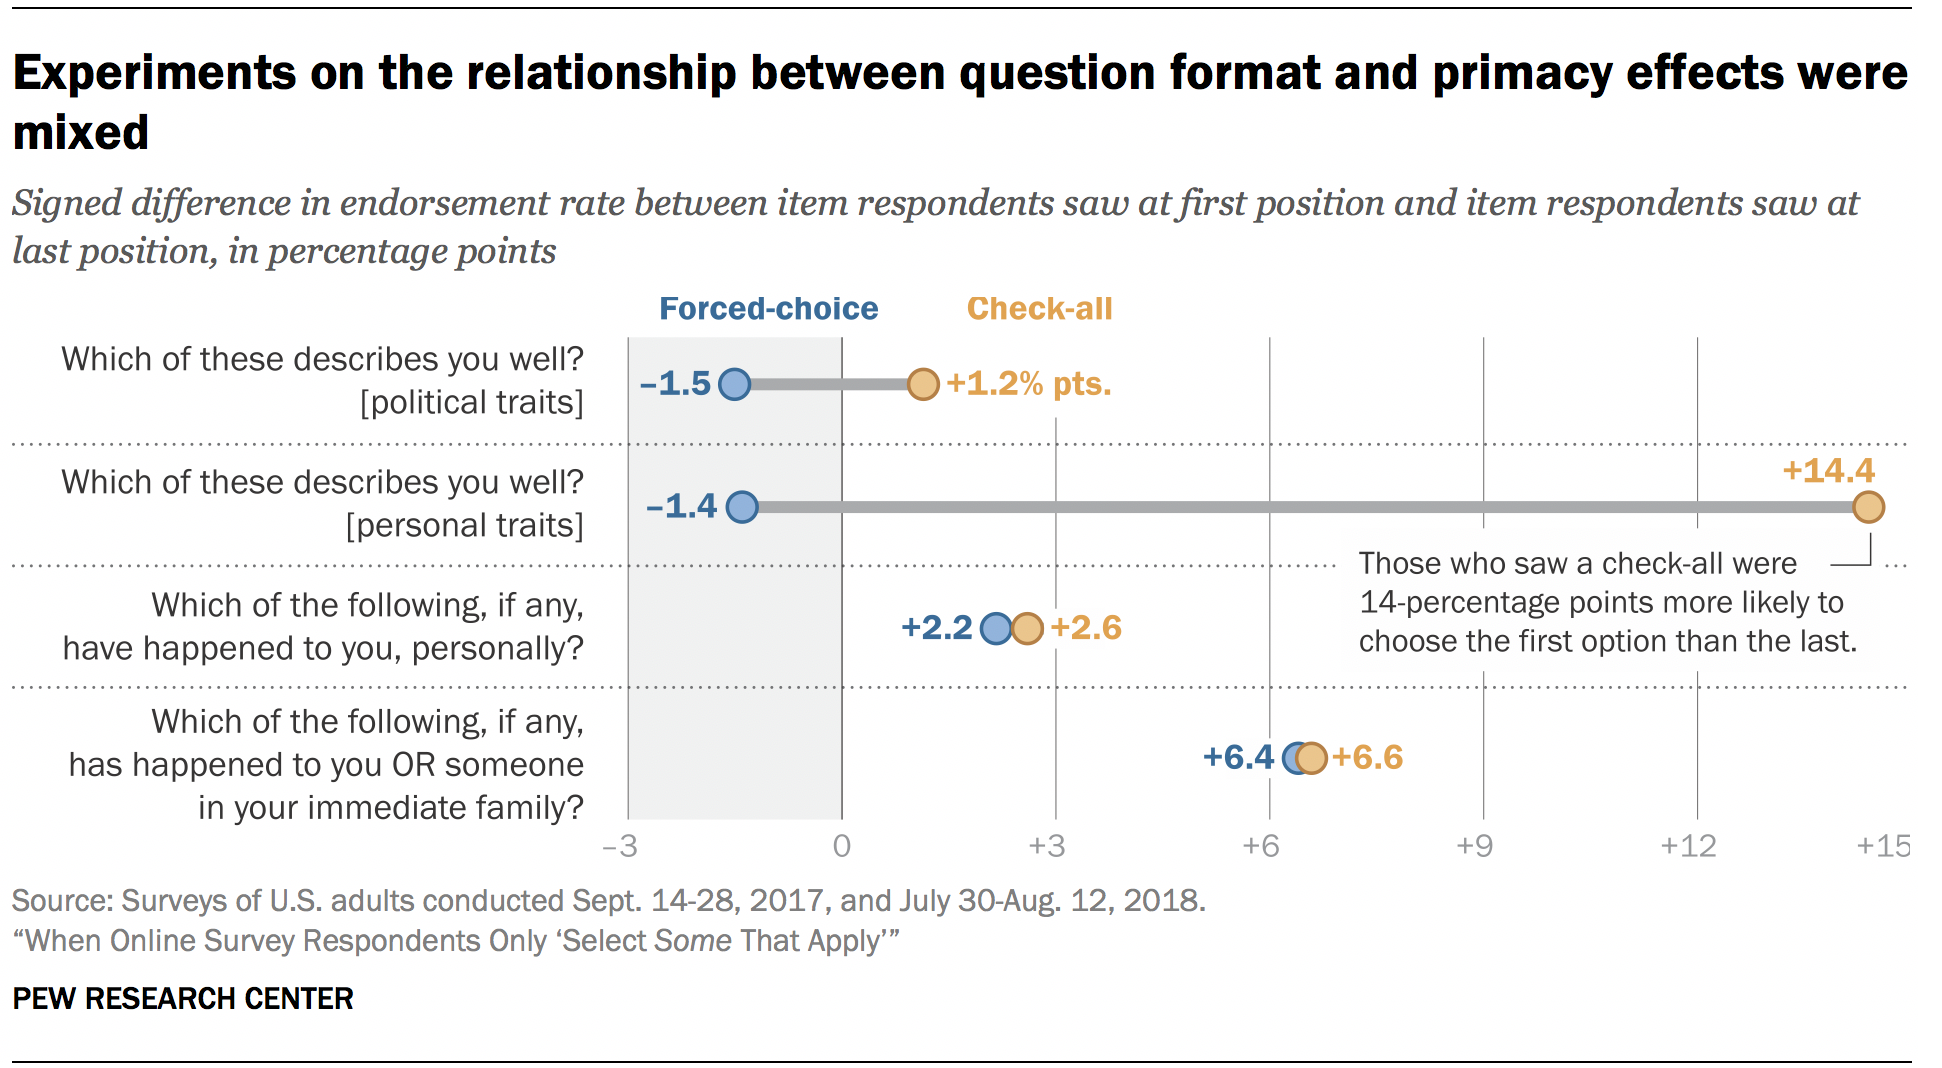 Experiments on the relationship between question format and primacy effects were mixed